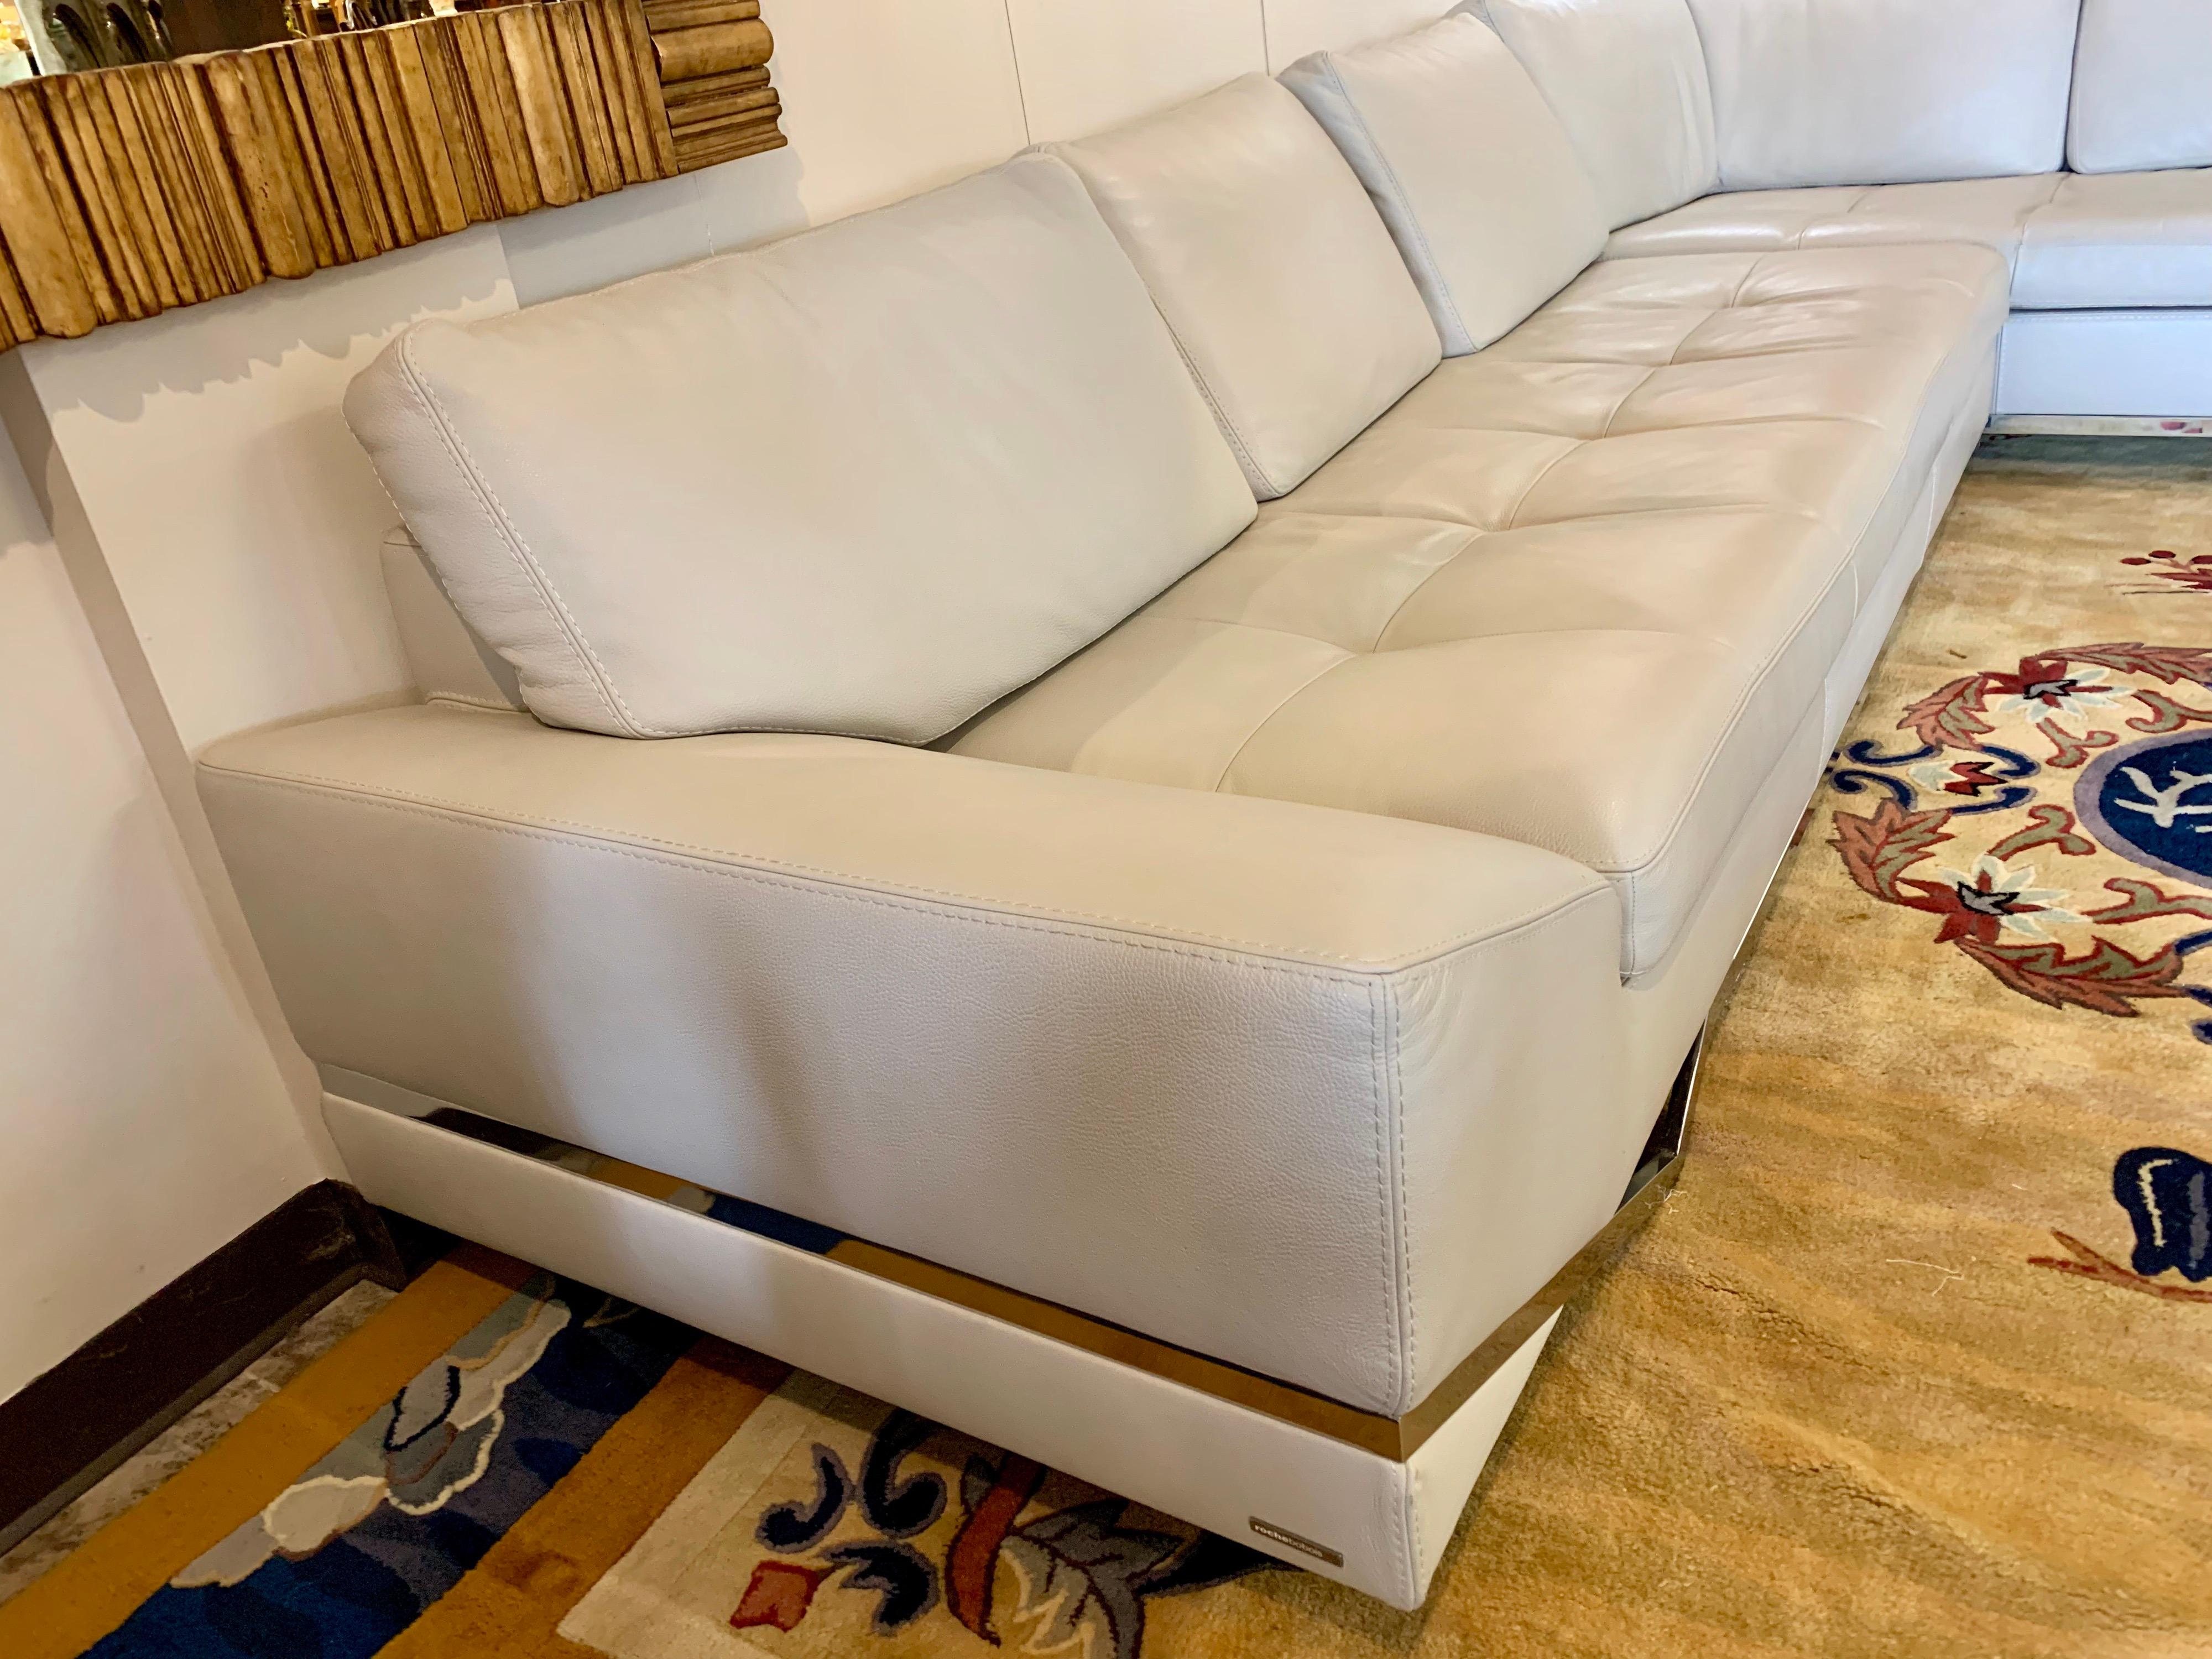 Original Signed Roche Bobois Leather Two-Piece Sectional Sofa Perfect 7